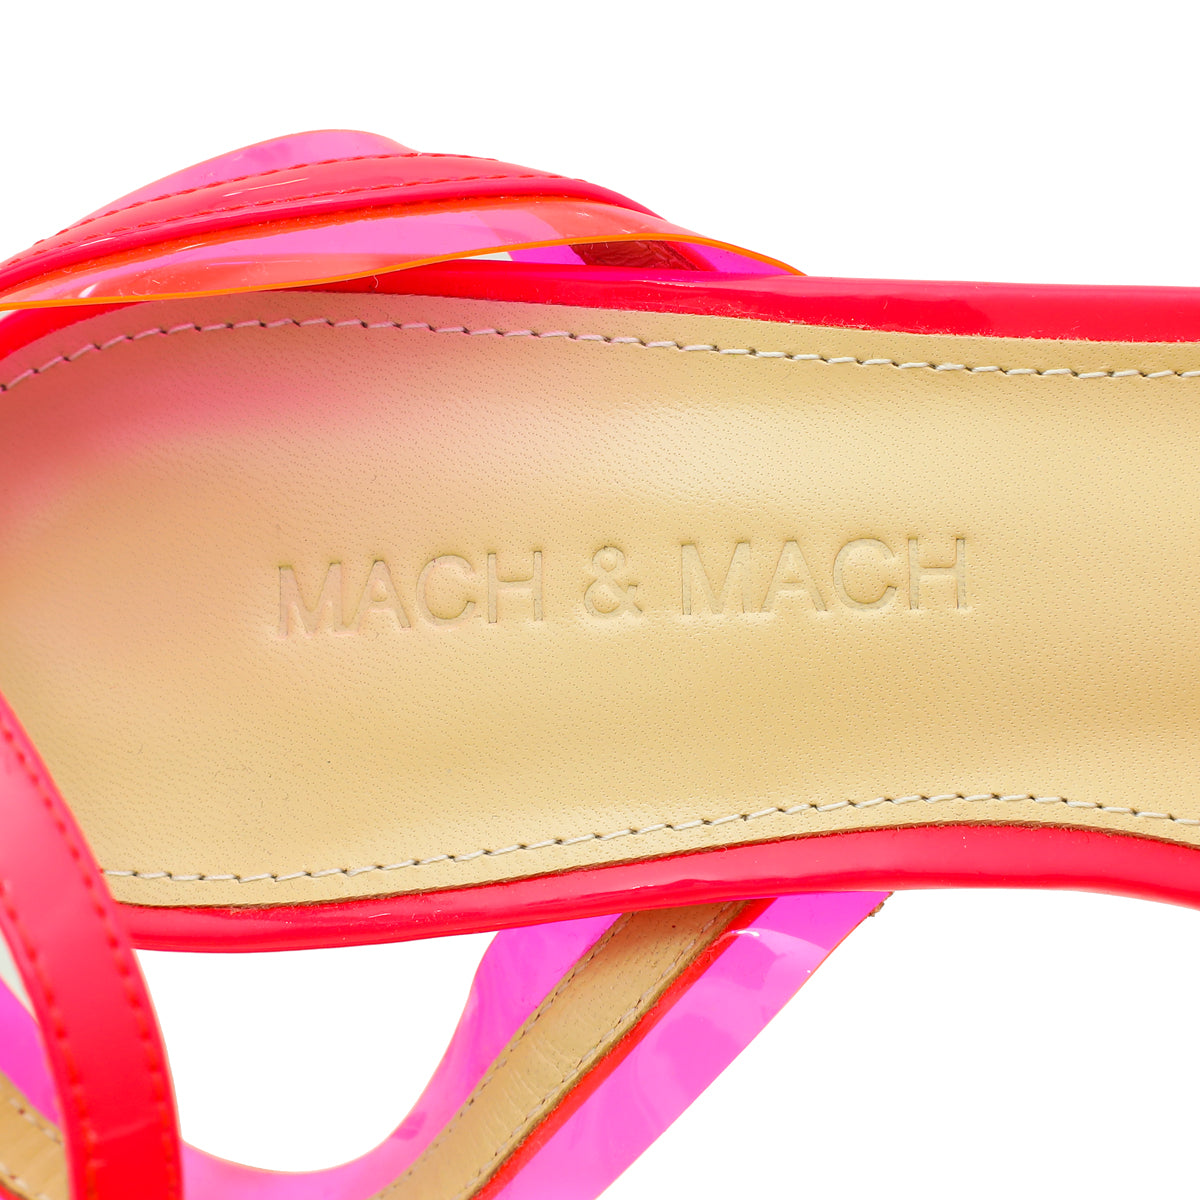 Mach & Mach Neon Pink French Bow Square Toe Sandal 36.5